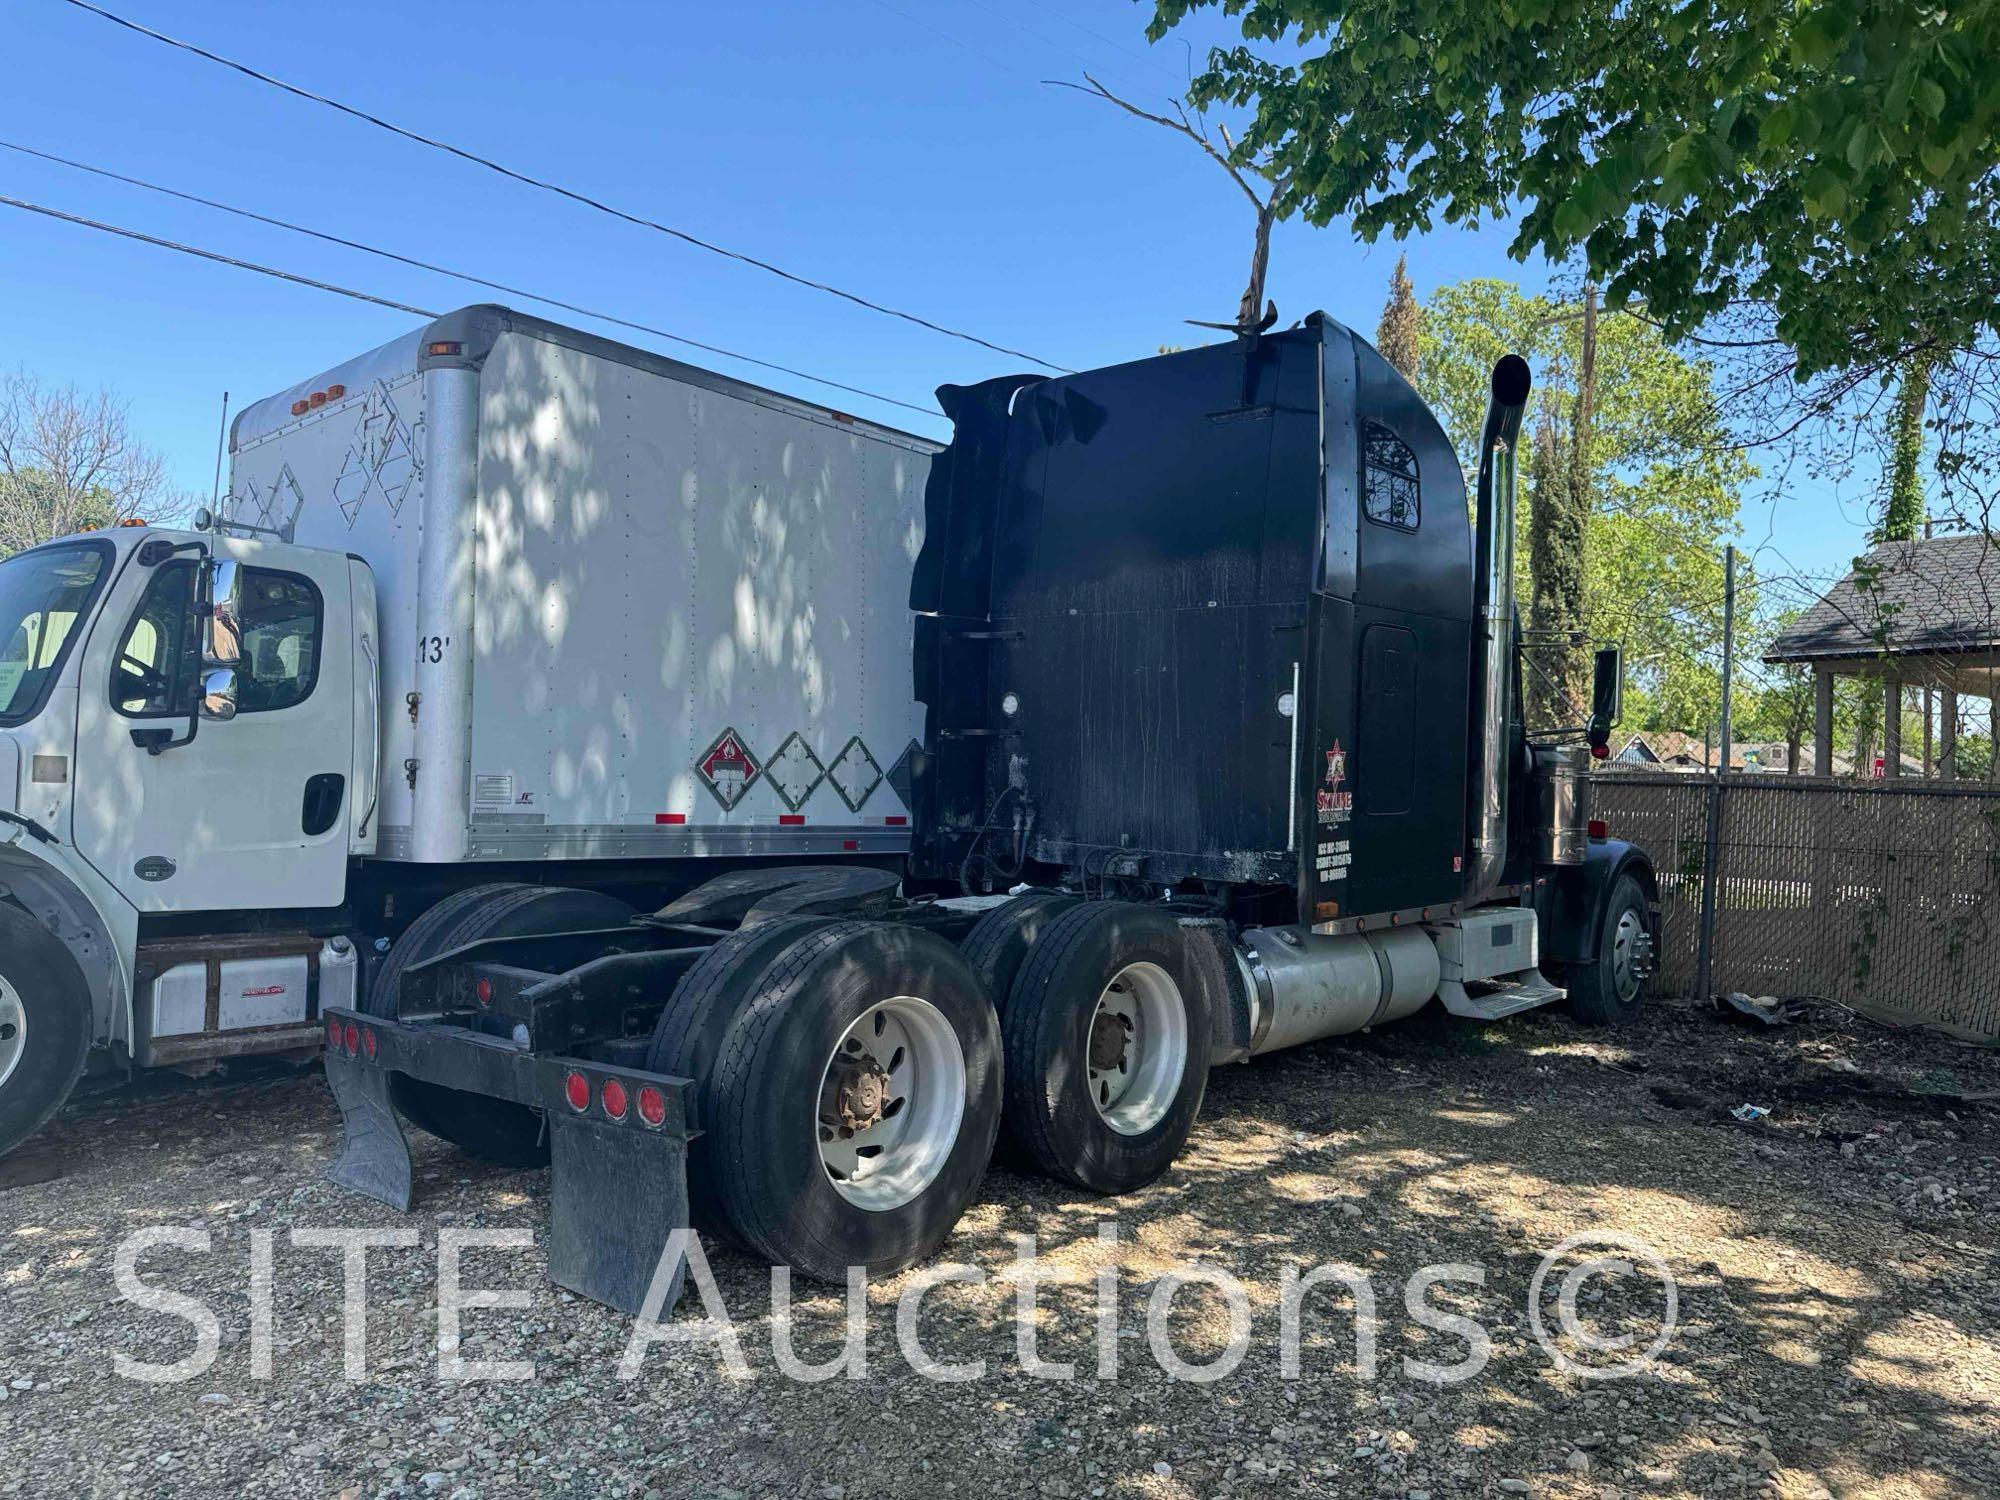 1997 Freightliner FLD120 T/A Sleeper Truck Tractor